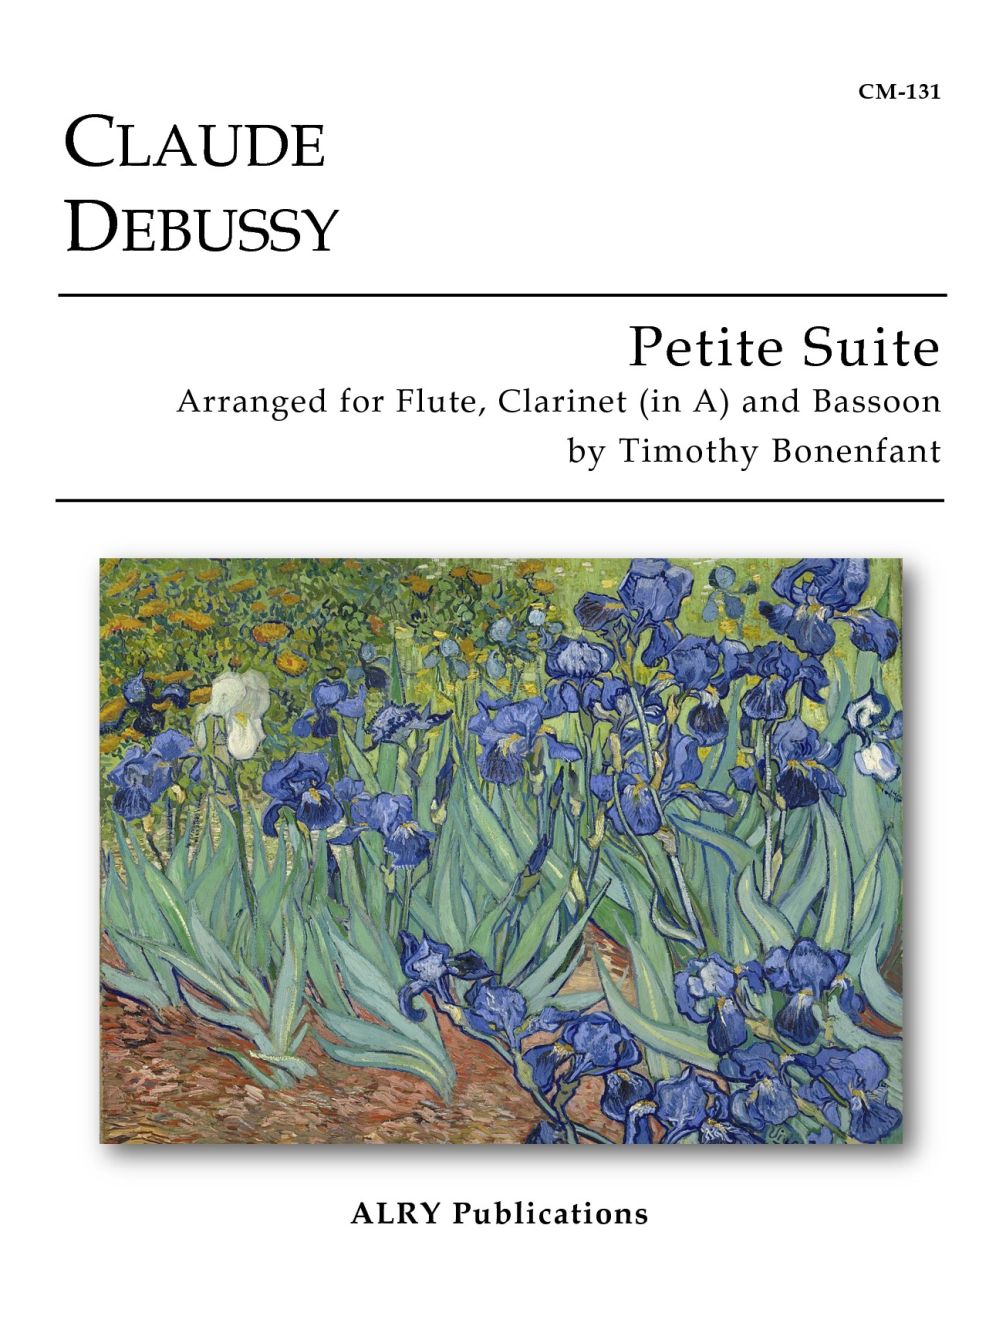 Petite Suite For Flute, Clarinet And Bassoon (DEBUSSY CLAUDE)